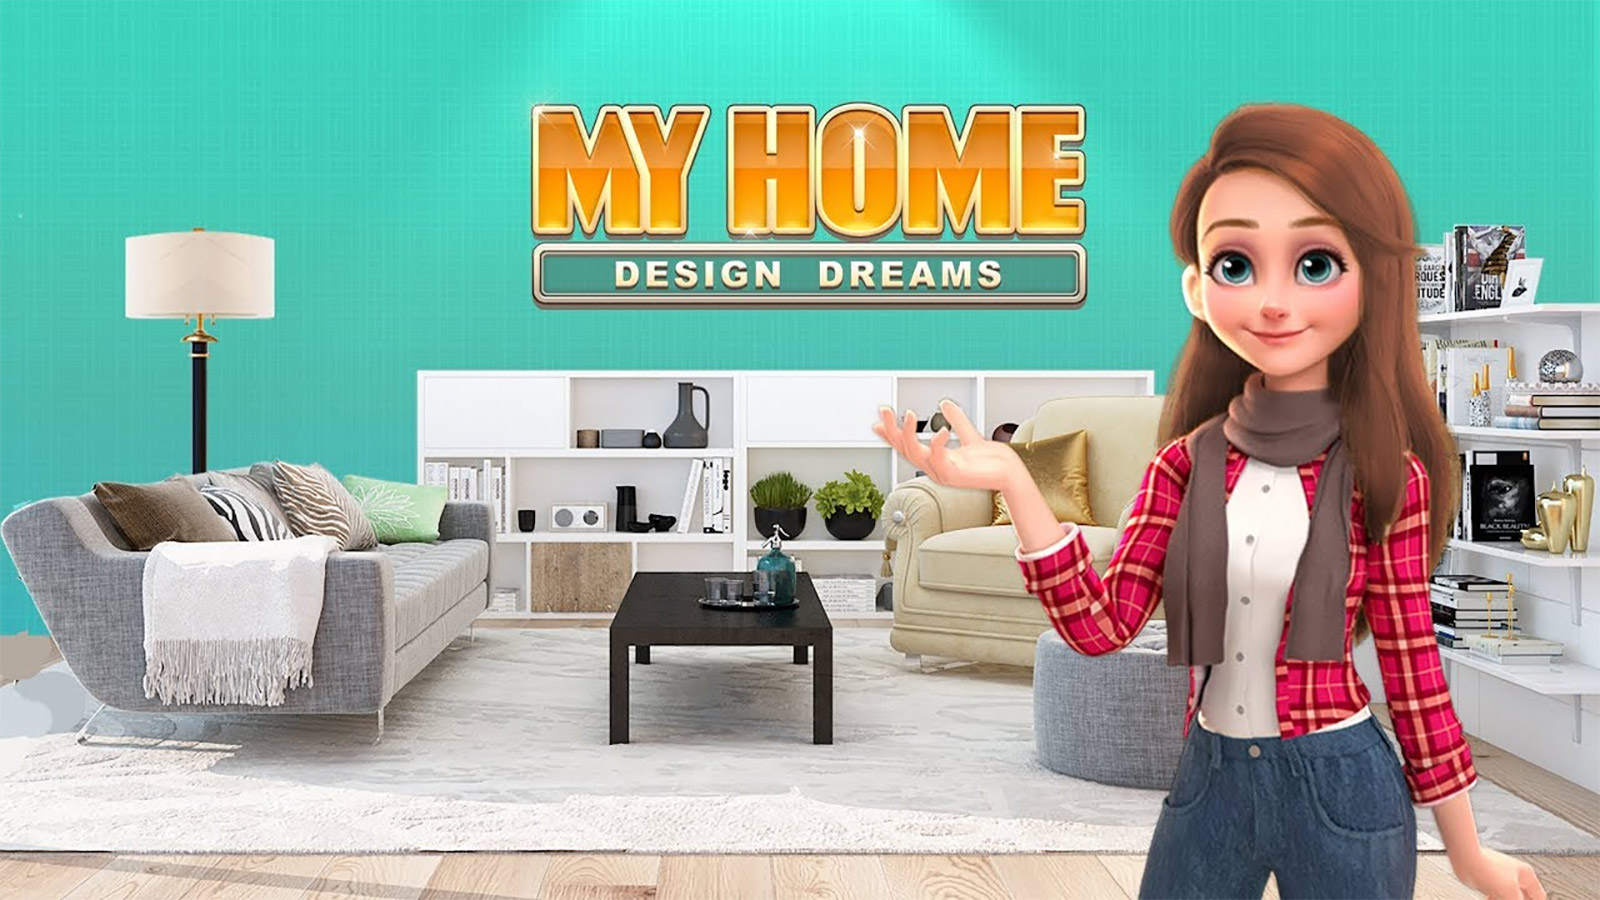 My dreams game. My Home. Дом дизайн моей мечты. Игра Life of your Dreams. My Home - Design Dreams.